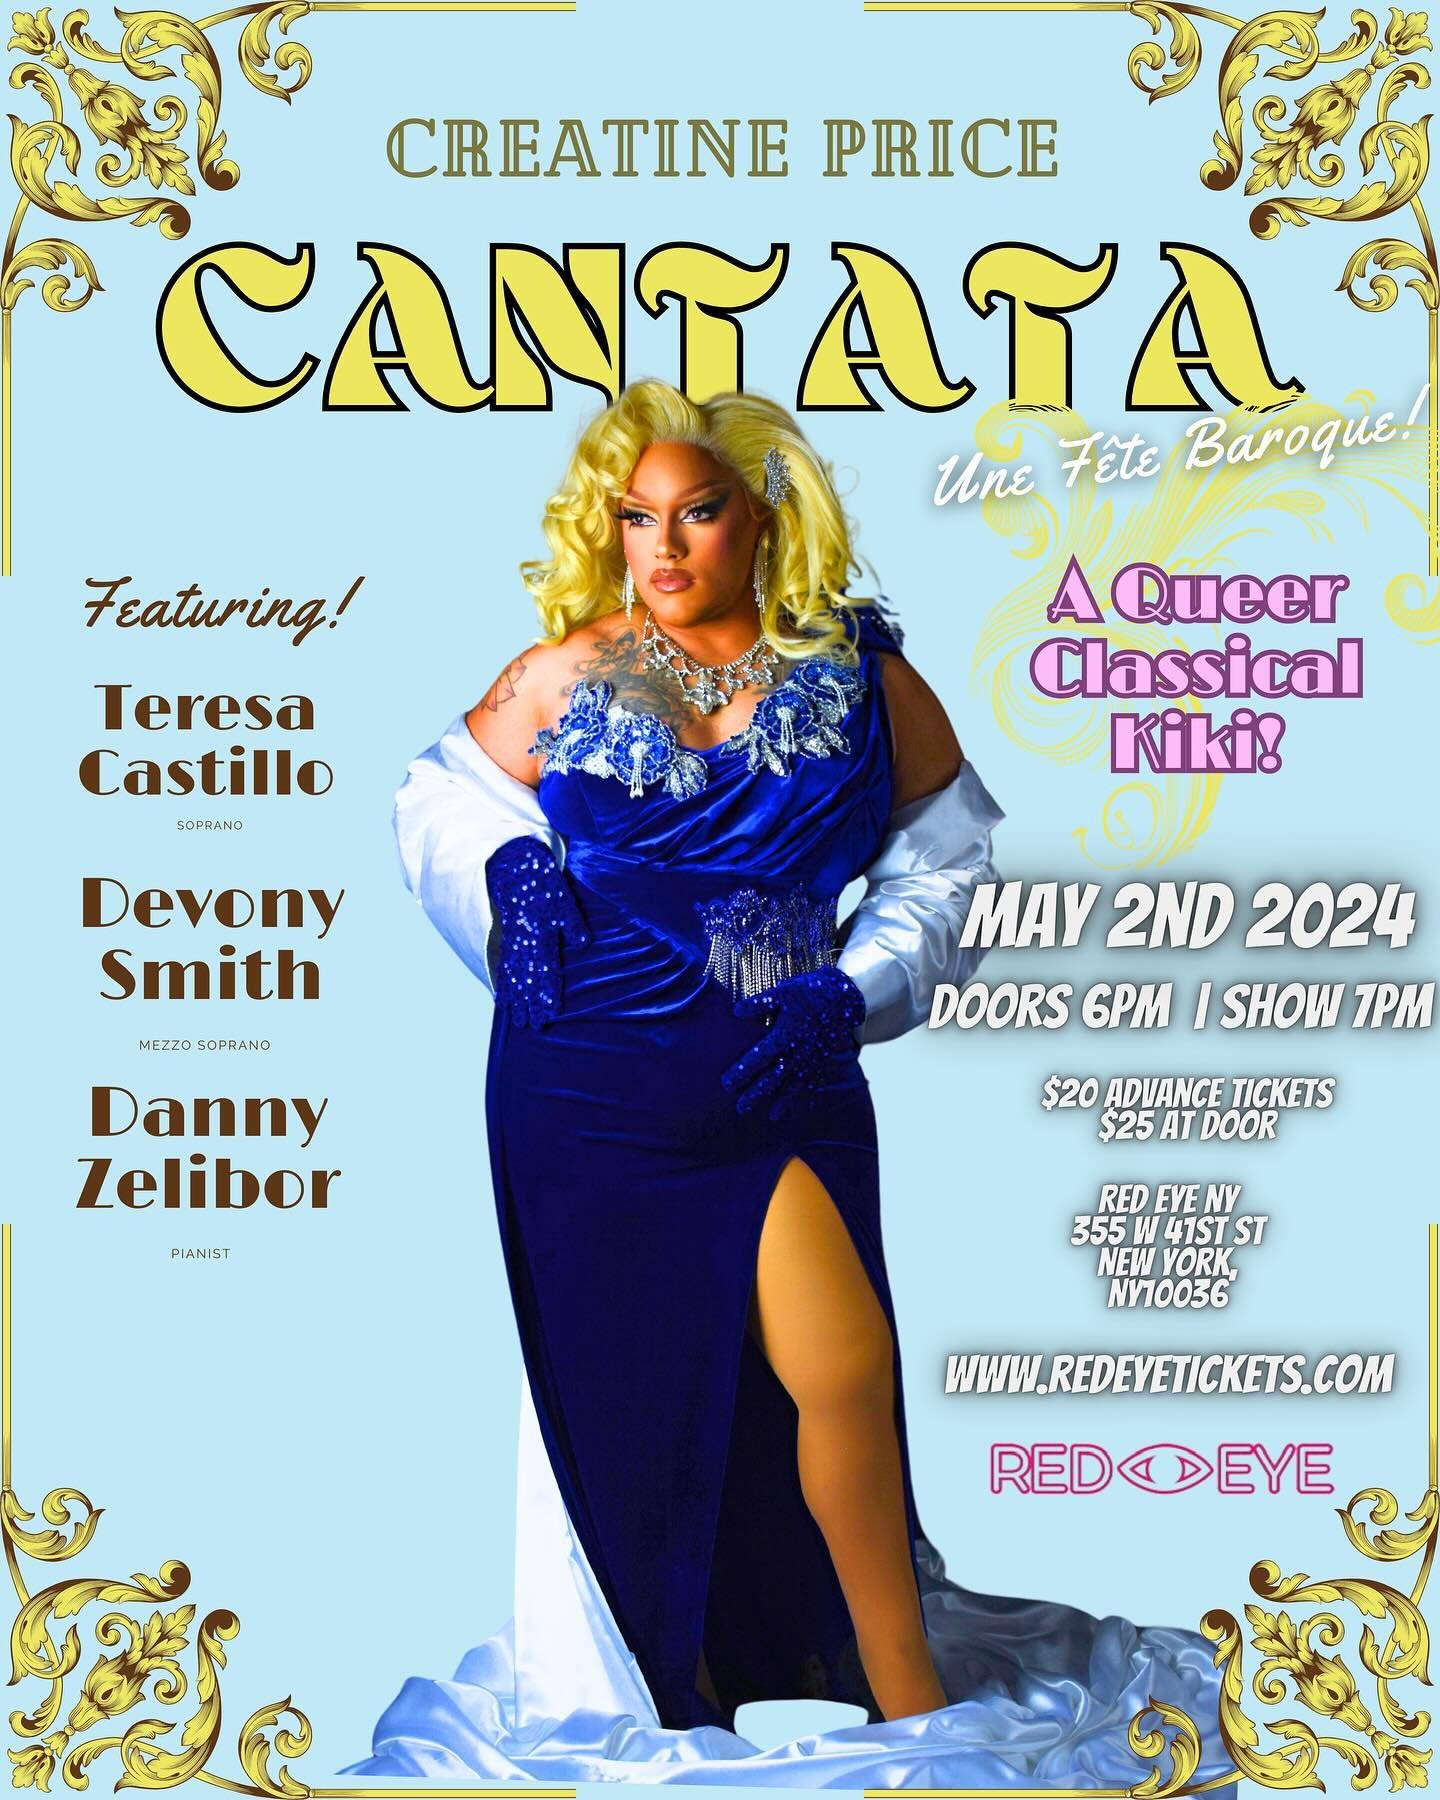 Schedule!!! 
May 2nd @redeye_ny !!! Cantata by ME ! Ticket link in Bio 
.
April 20th Songs of Spring Recital with @lucas.bouk at the Blue Building on E. 46th
.
April 29th EBONIQUE with @lanyearmon @jtaraye @anylah_thedoll @berthavnyc ticket link in B